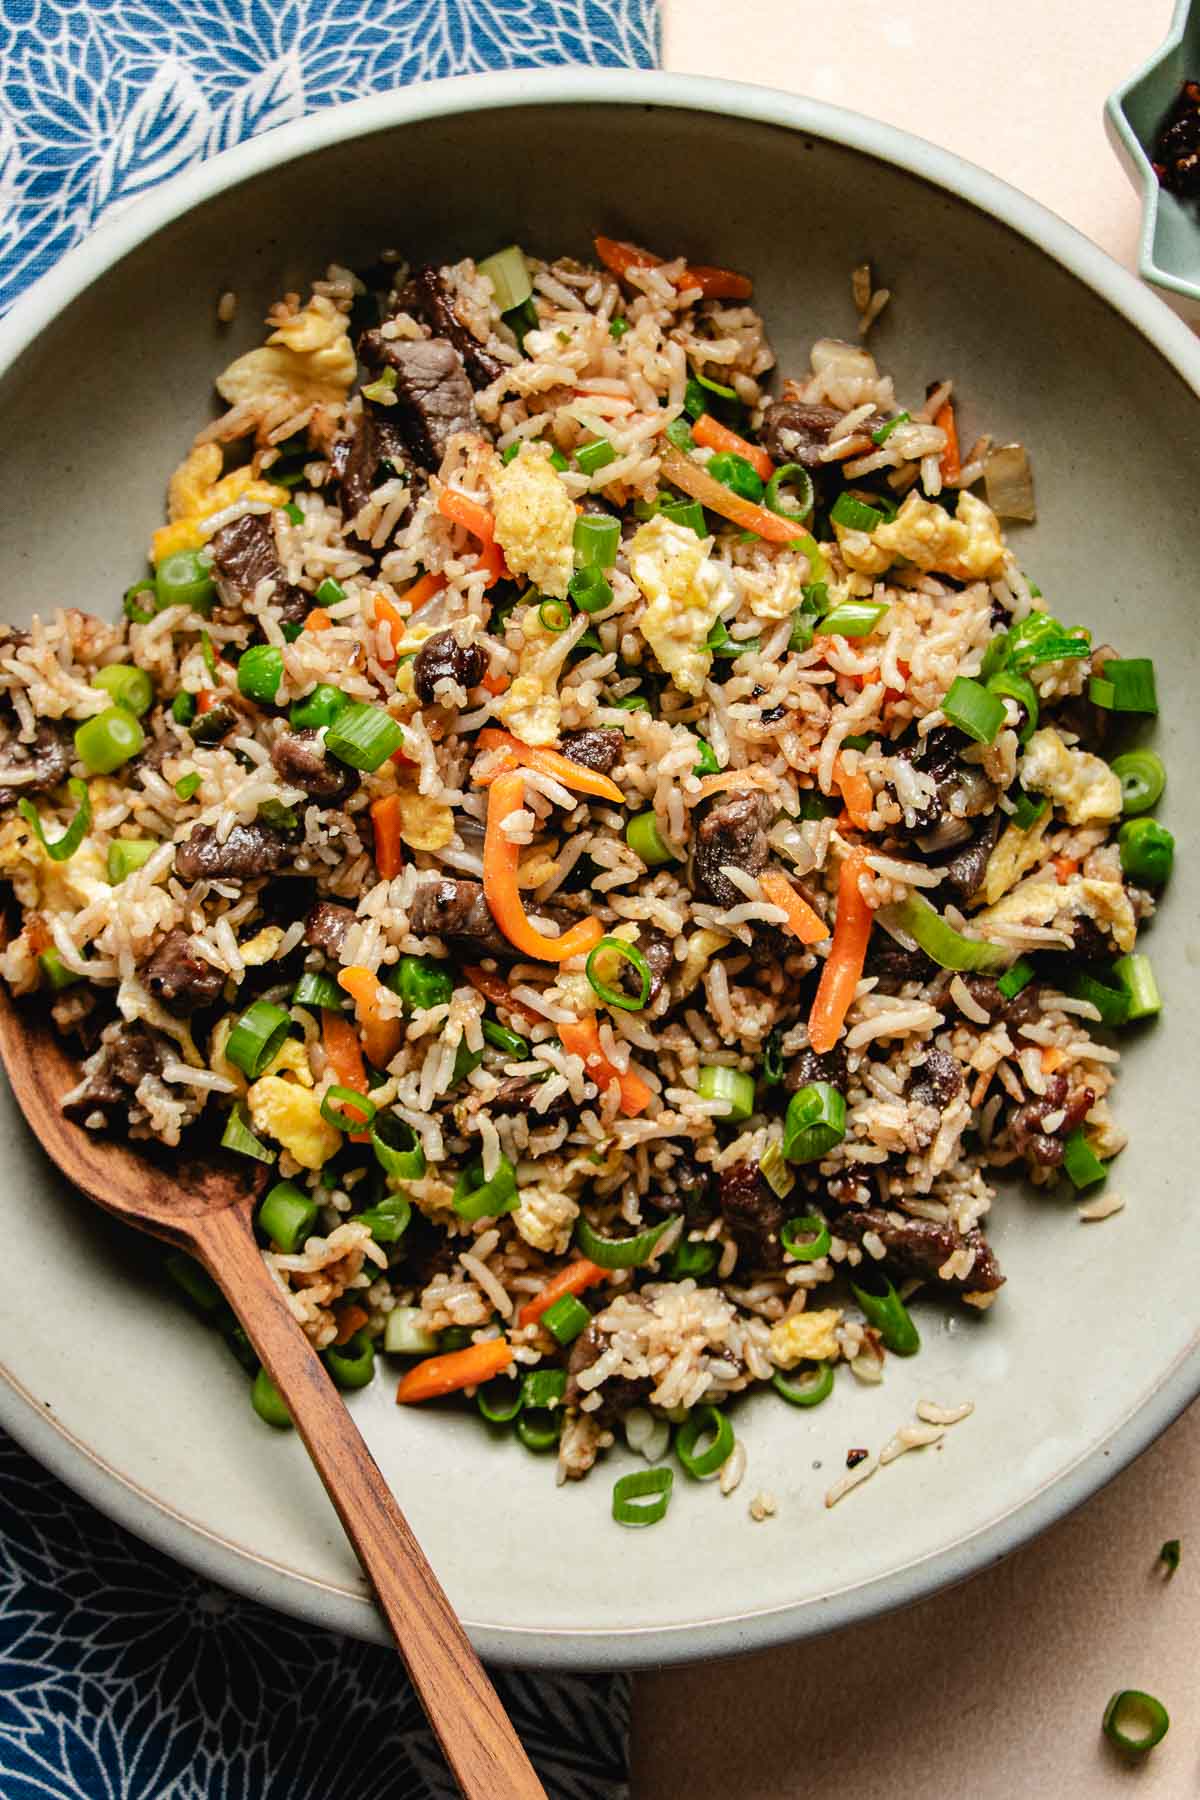 Feature image shows tender steak marinated and stir fried with rice served on a light gray color plate.